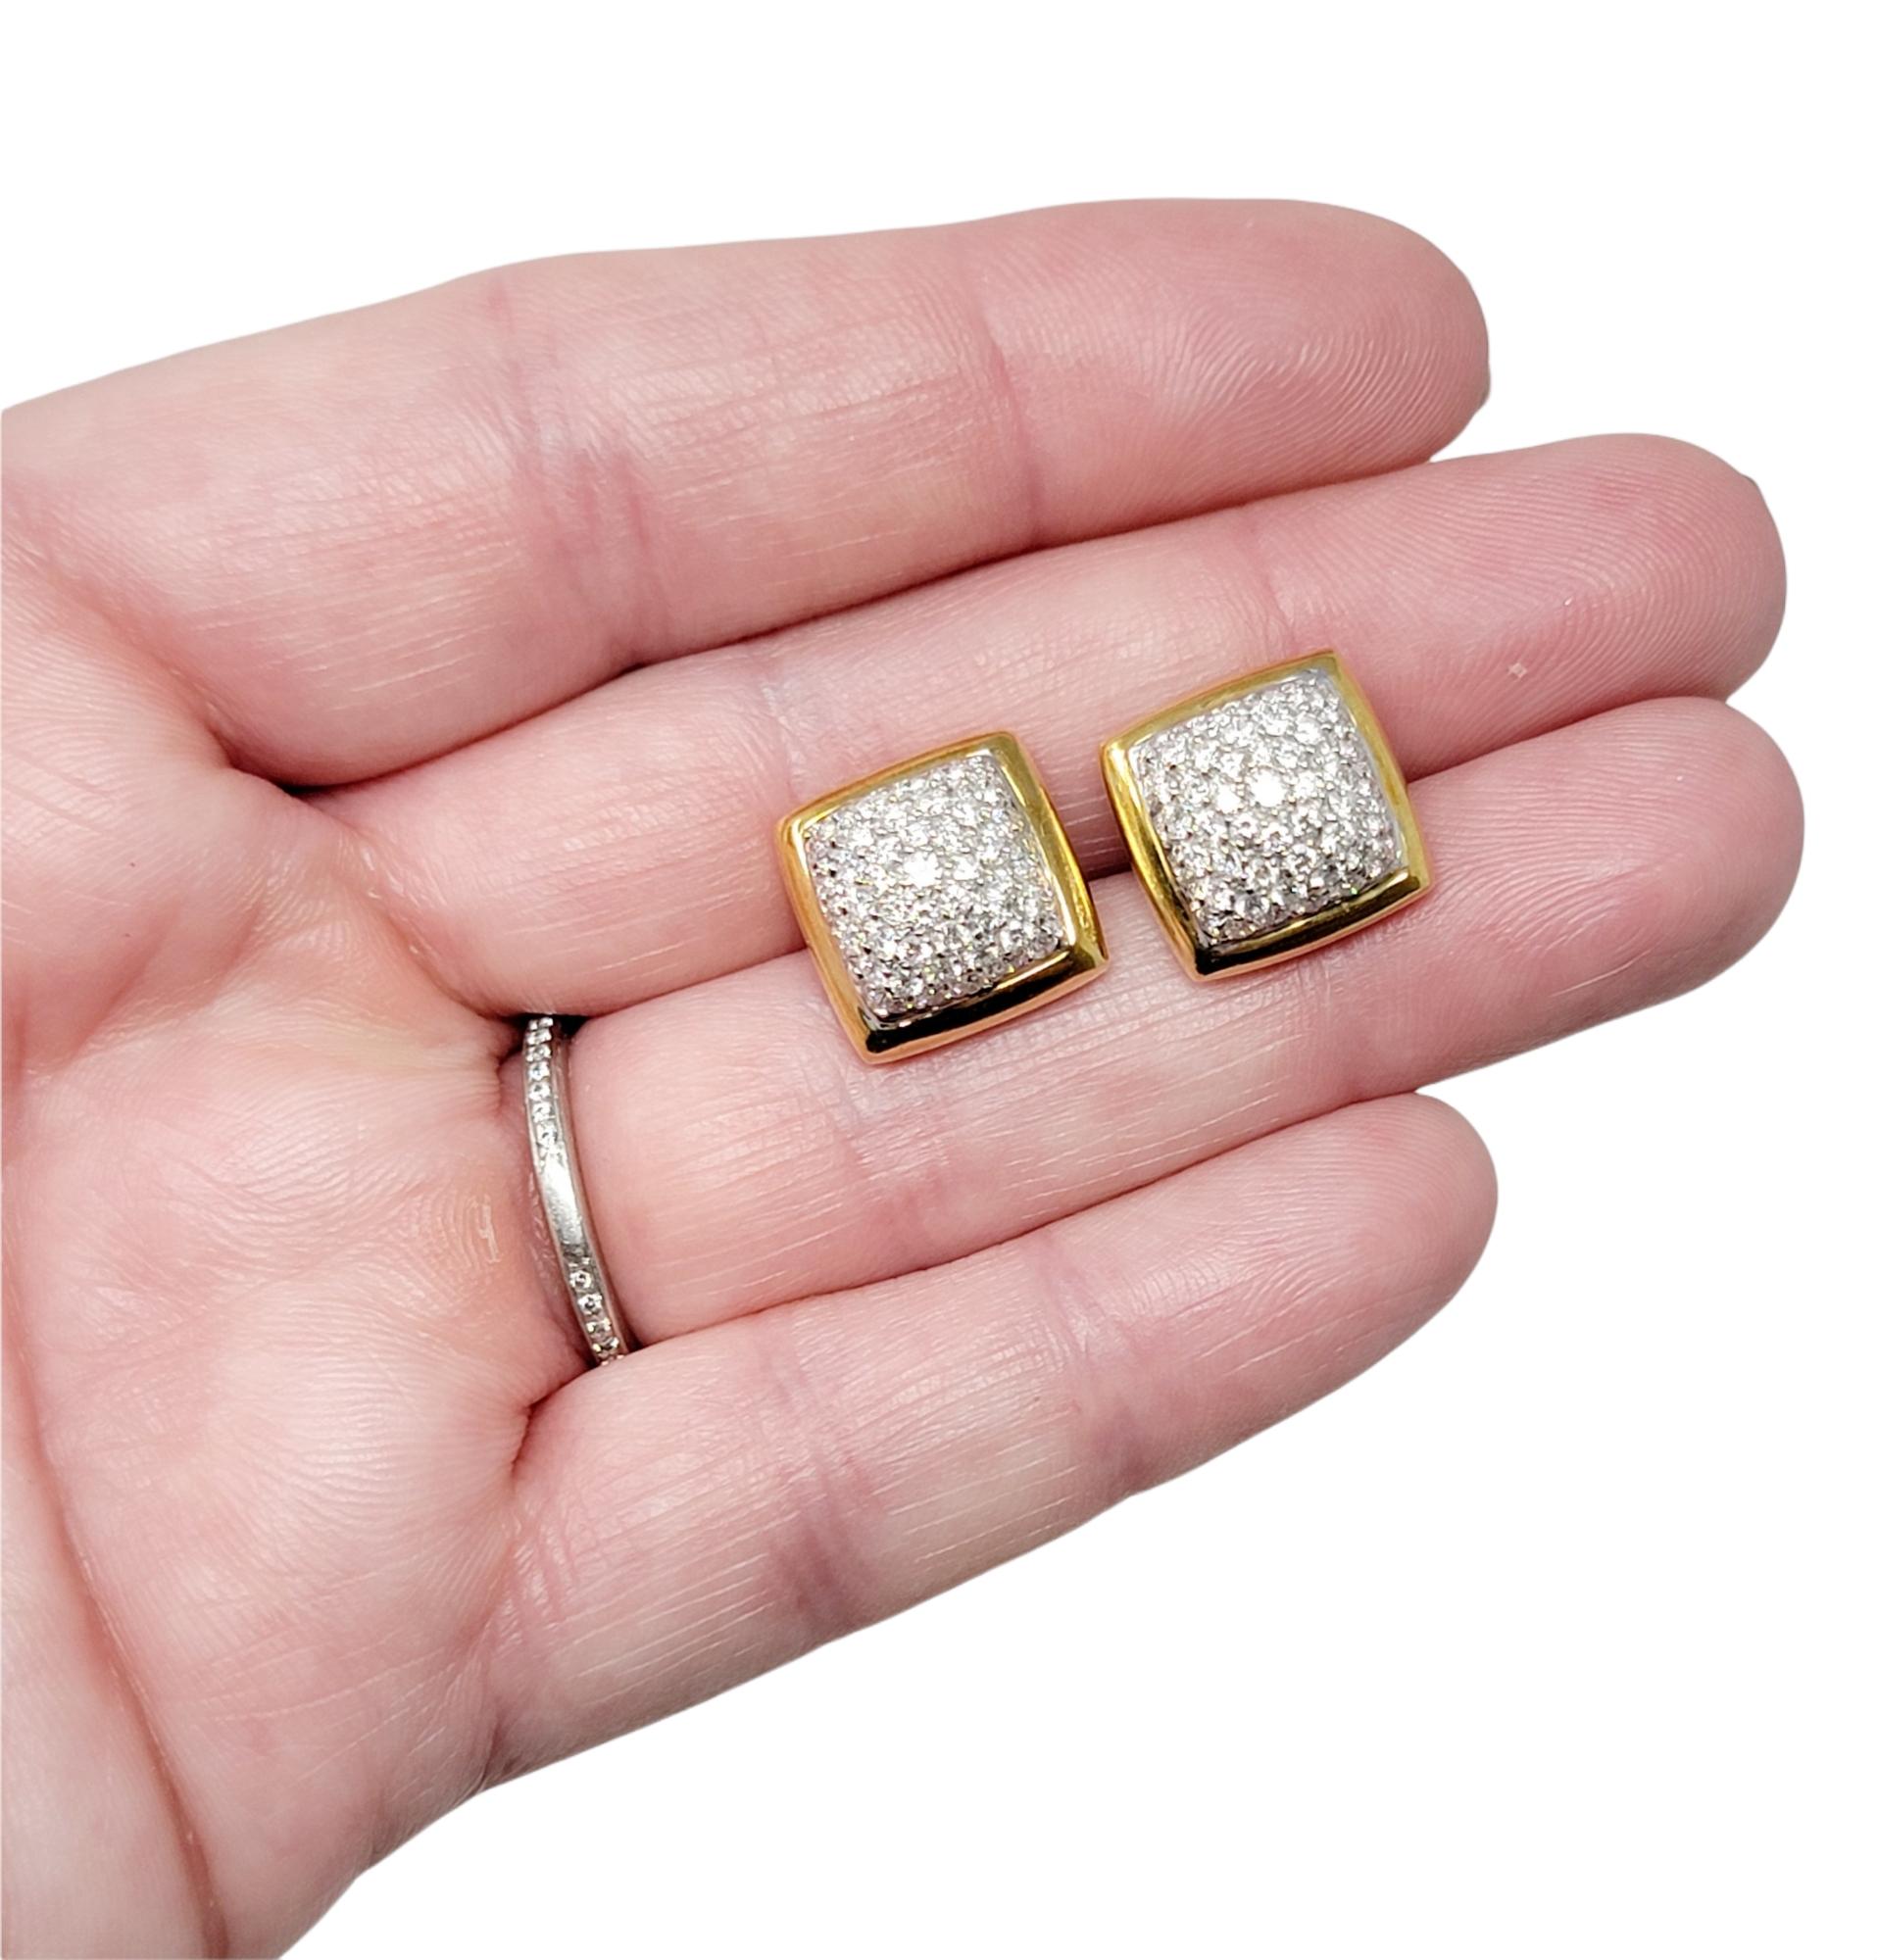 1.75 Carat Total Diamond Pave Dome Square Stud Earrings Two-Tone 18 Karat Gold In Good Condition For Sale In Scottsdale, AZ